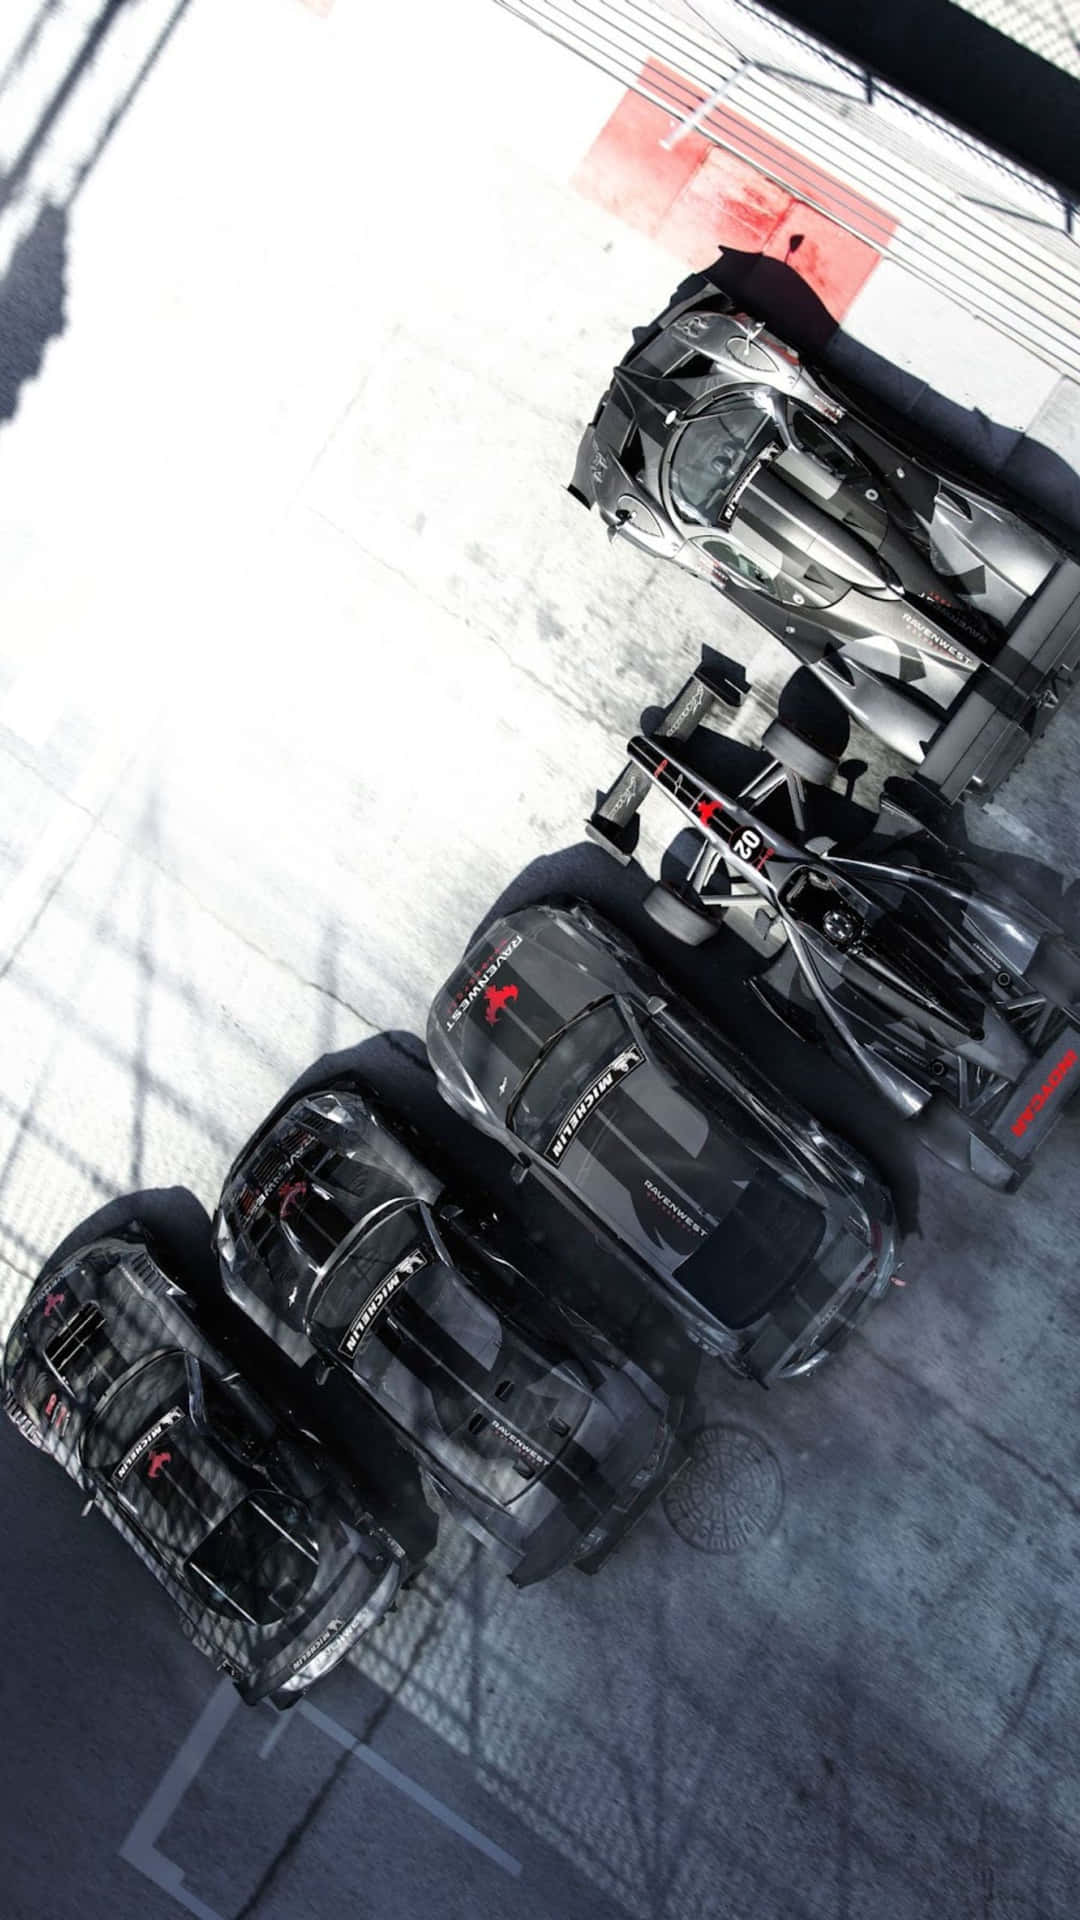 “Experience the Thrill of Racing with Android Grid Autosport!”